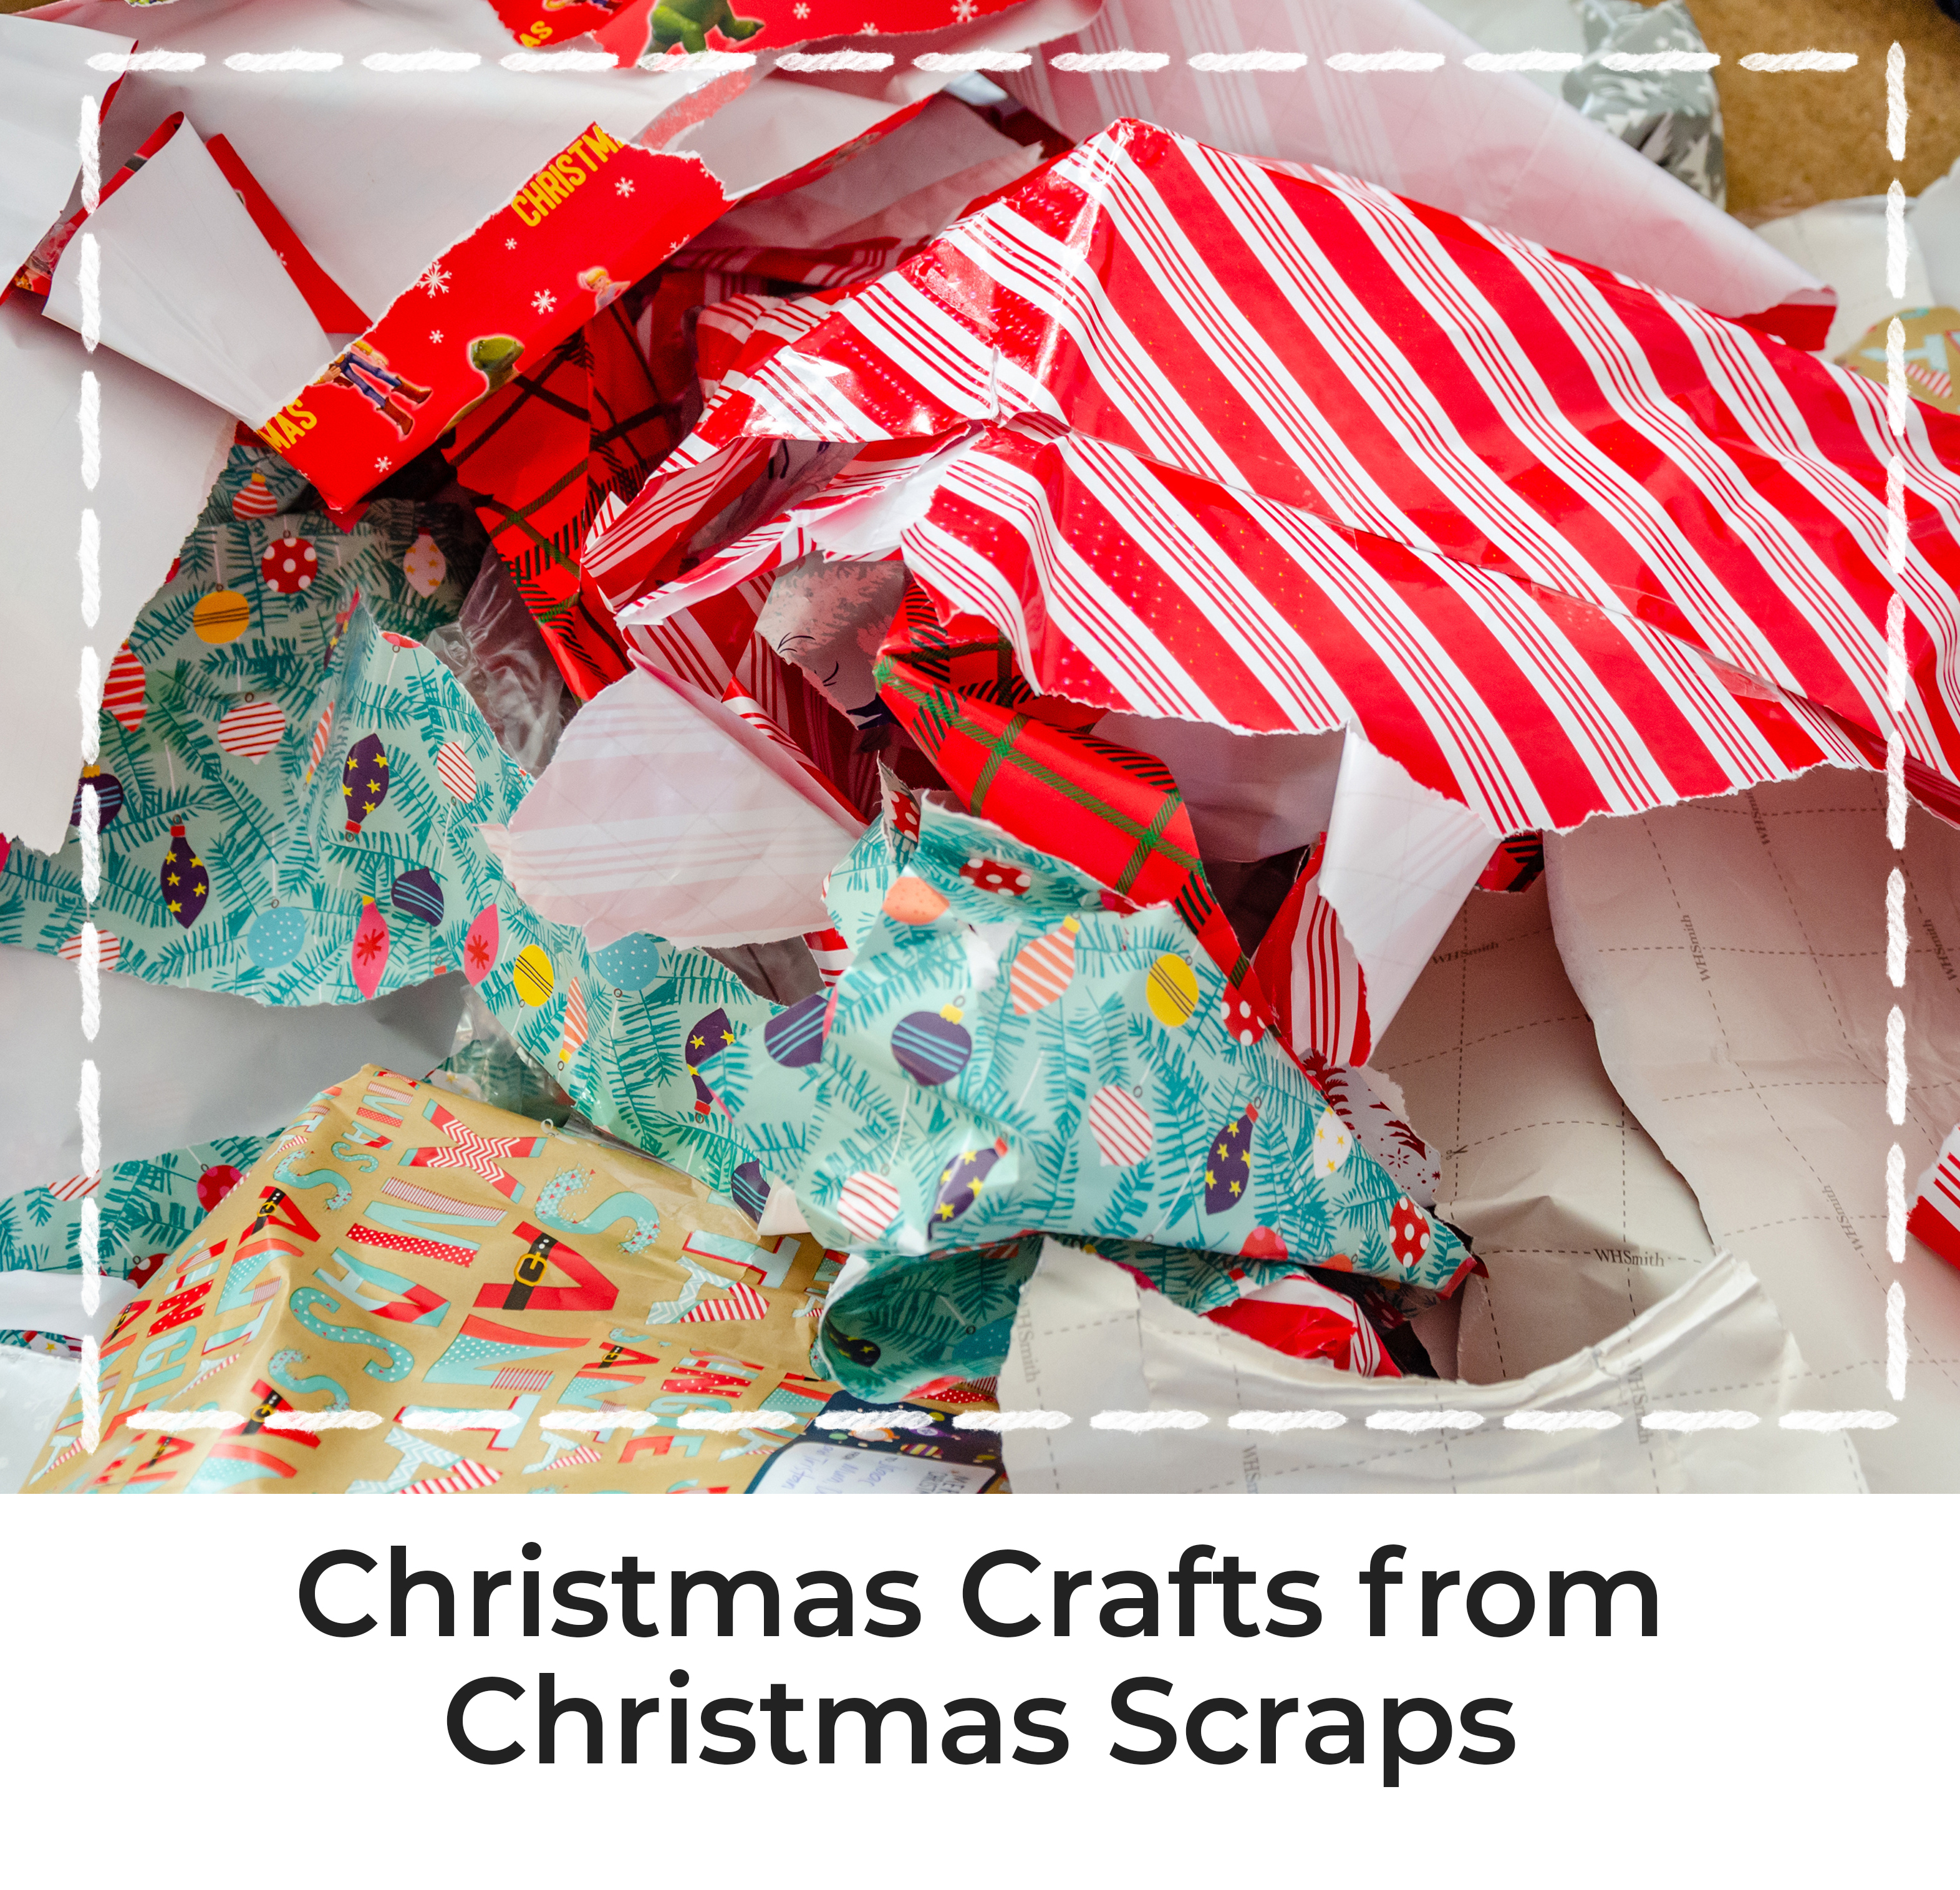 Christmas Crafts from Christmas Scraps